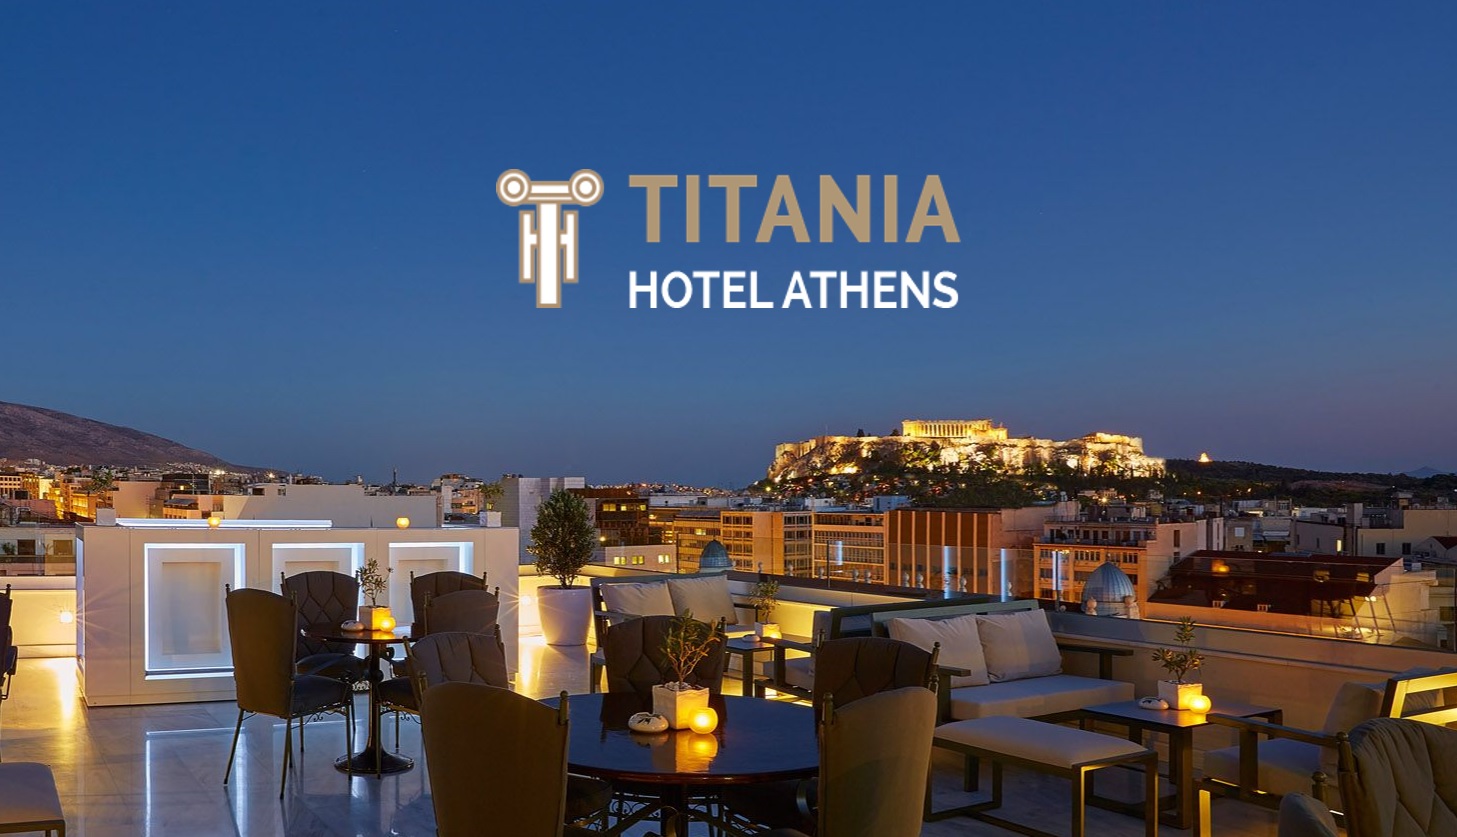 A picture of the top deck of Hotel Titania overlooking the city with the Acropolis in the background.